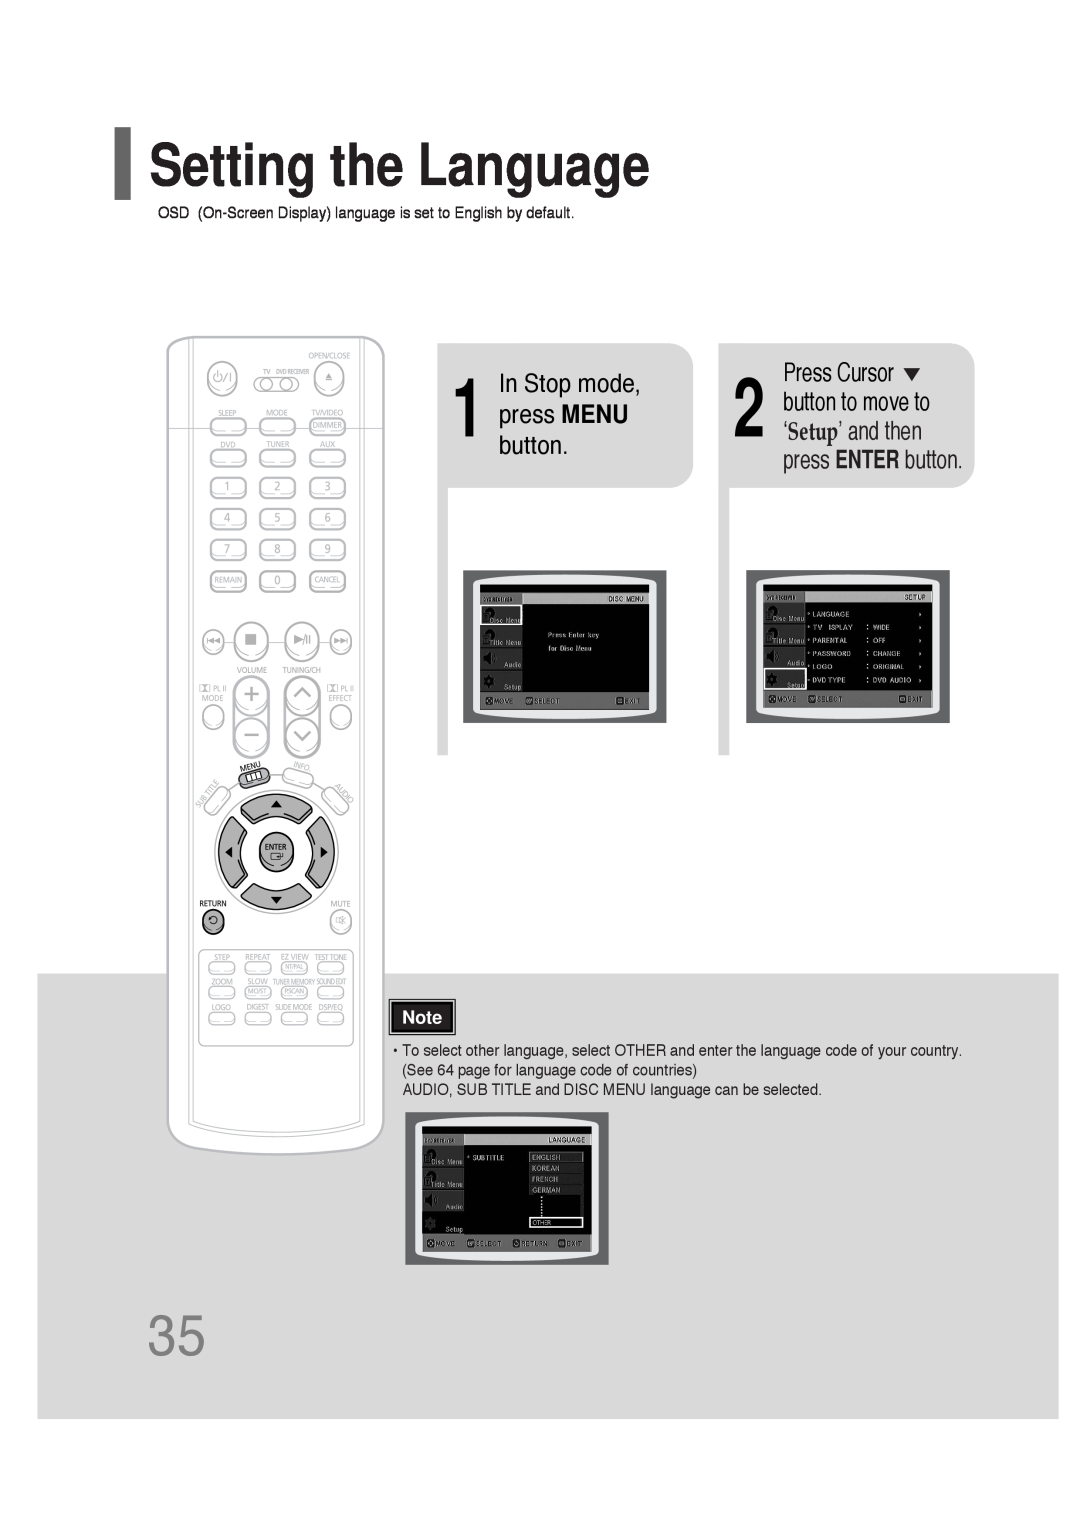 Samsung HT-P30 Setting the Language, Stop mode, button.press MENU, Press Cursor, ‘Setup’ and then, button to move to 